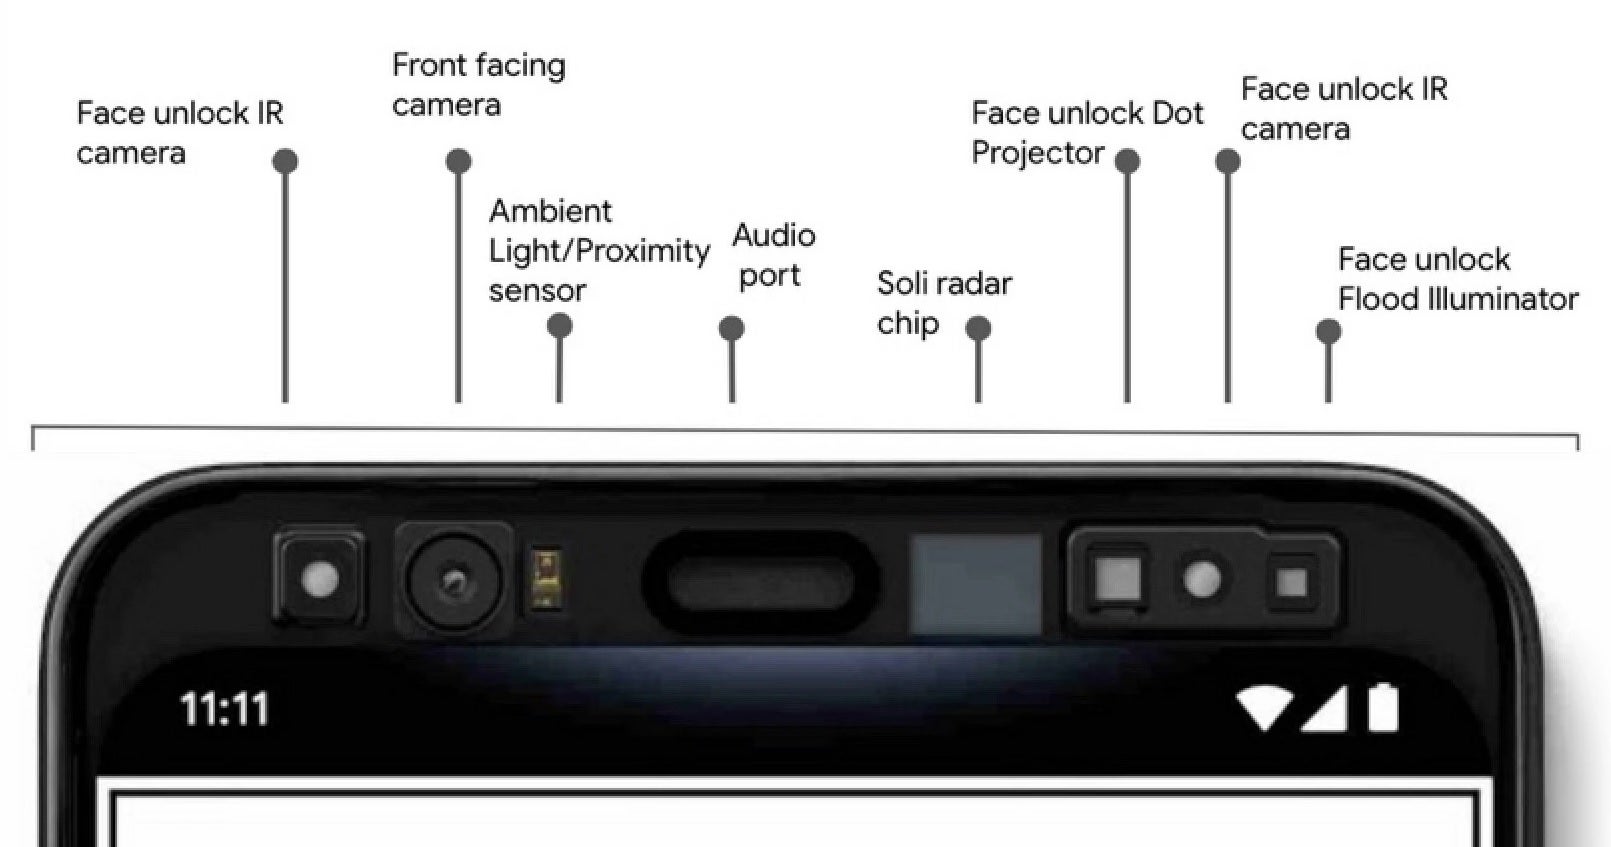 The hardware used on the Pixel 4 series to create a 3D map of the user's face - Sony sensor used on Pixel 6 Pro might allow Face unlock to be added to the phone